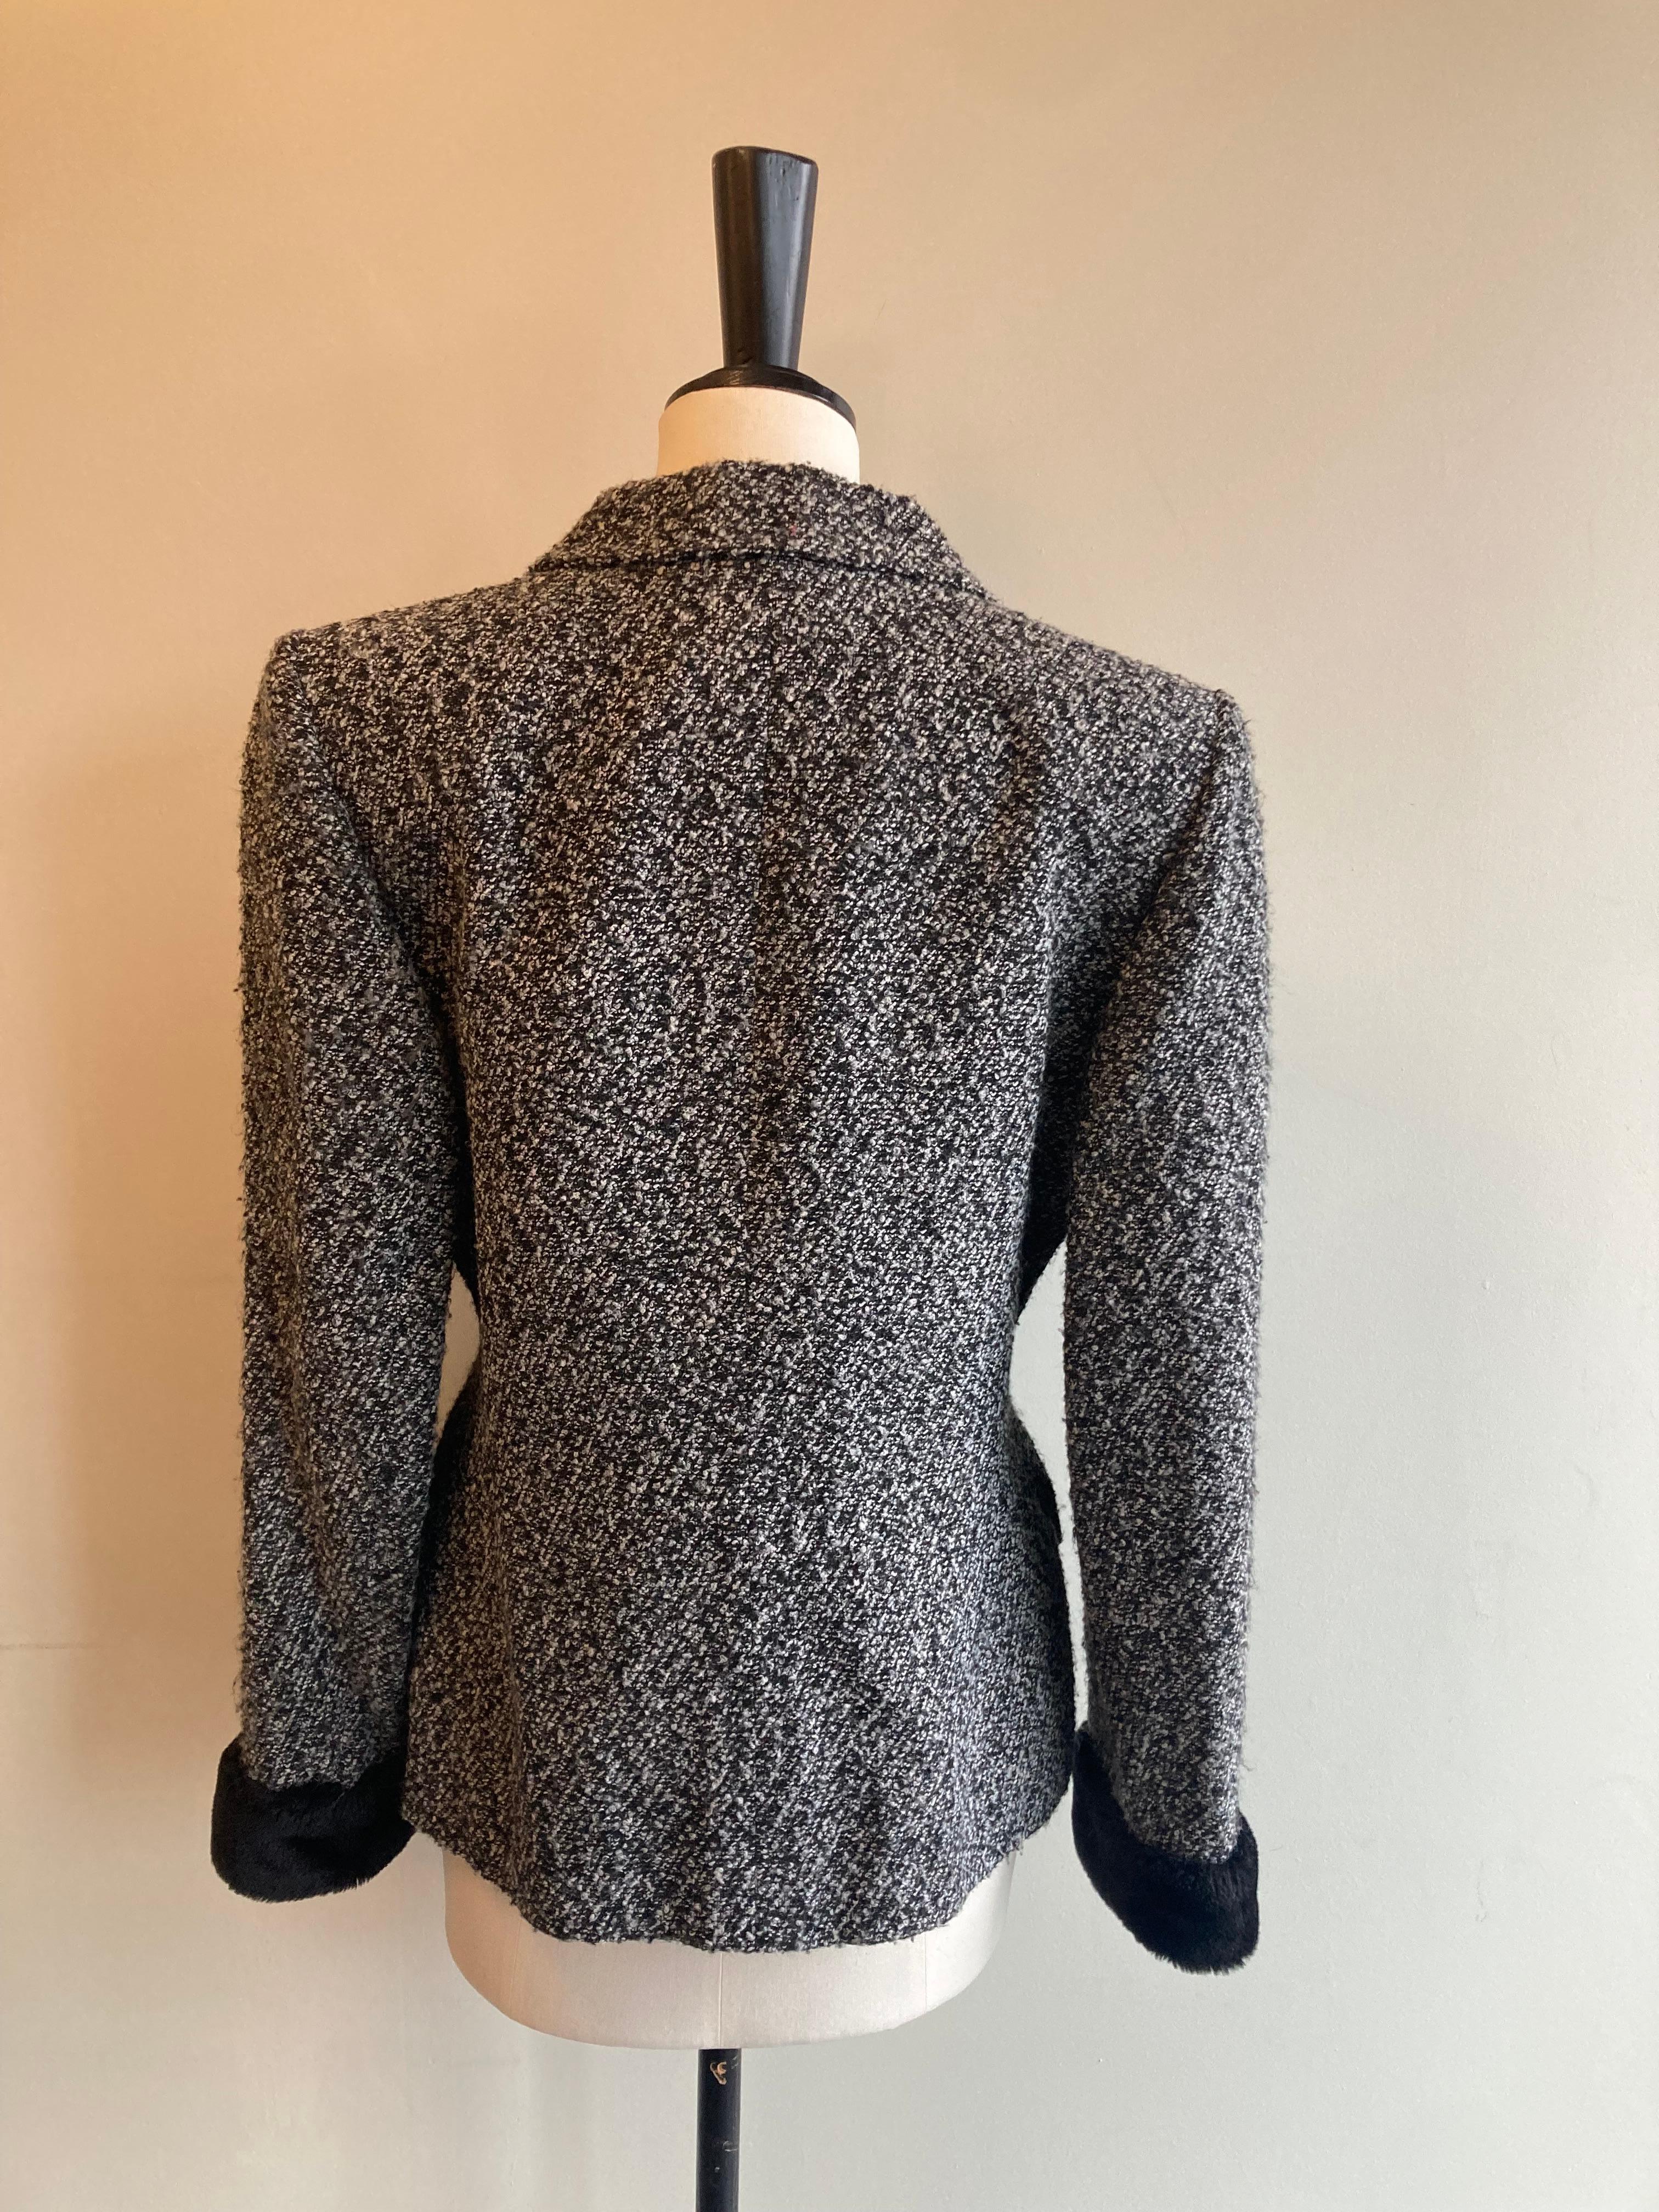 Yves Saint Laurent Black and White Wool Jacket In Fair Condition For Sale In Glasgow, GB